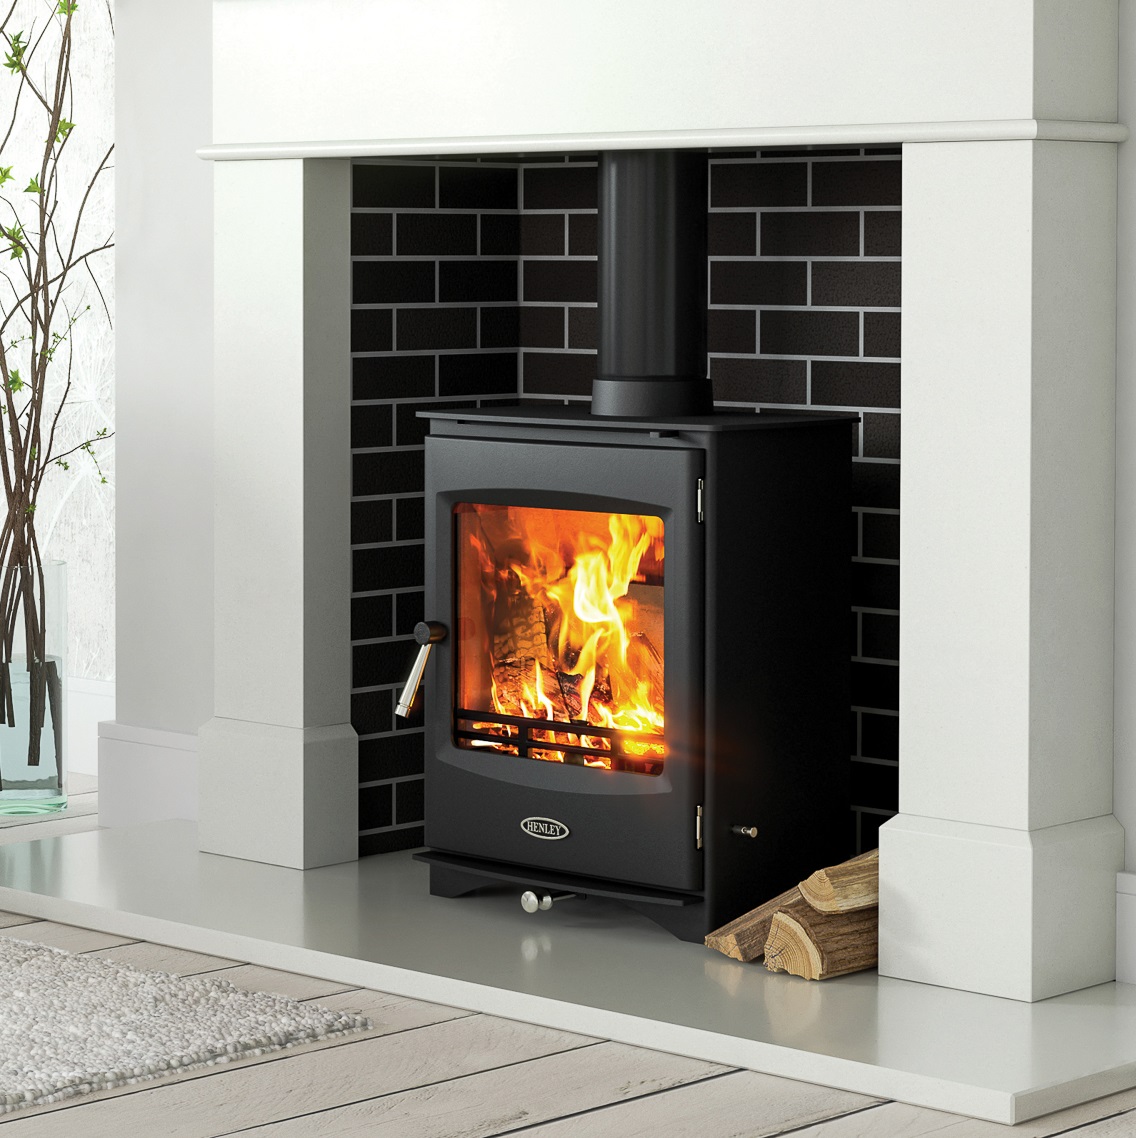 Lincoln Stove Defra – Freestanding Multifuel Stove 5kW